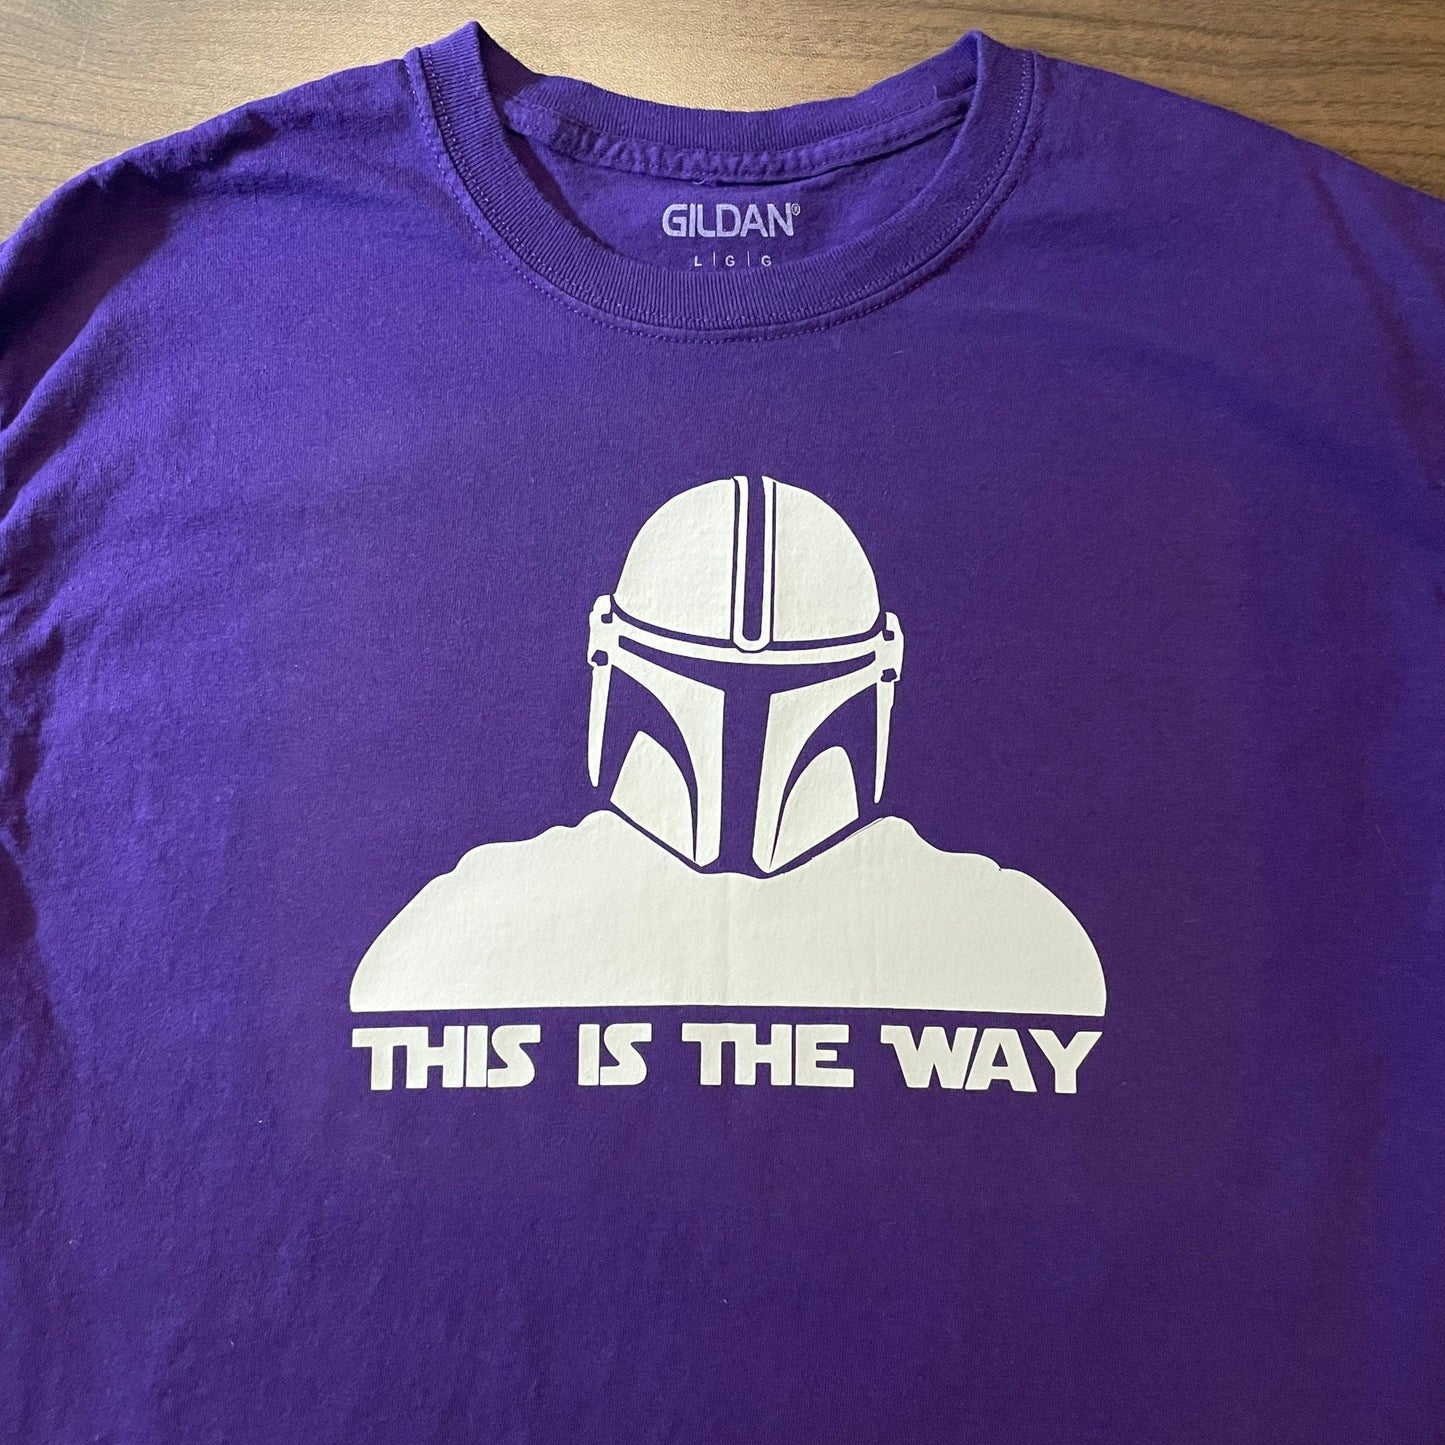 This is the Way Mandalorian Iron-On Heat Transfer Vinyl - Decal Only -Somolux White on Purple Shirt